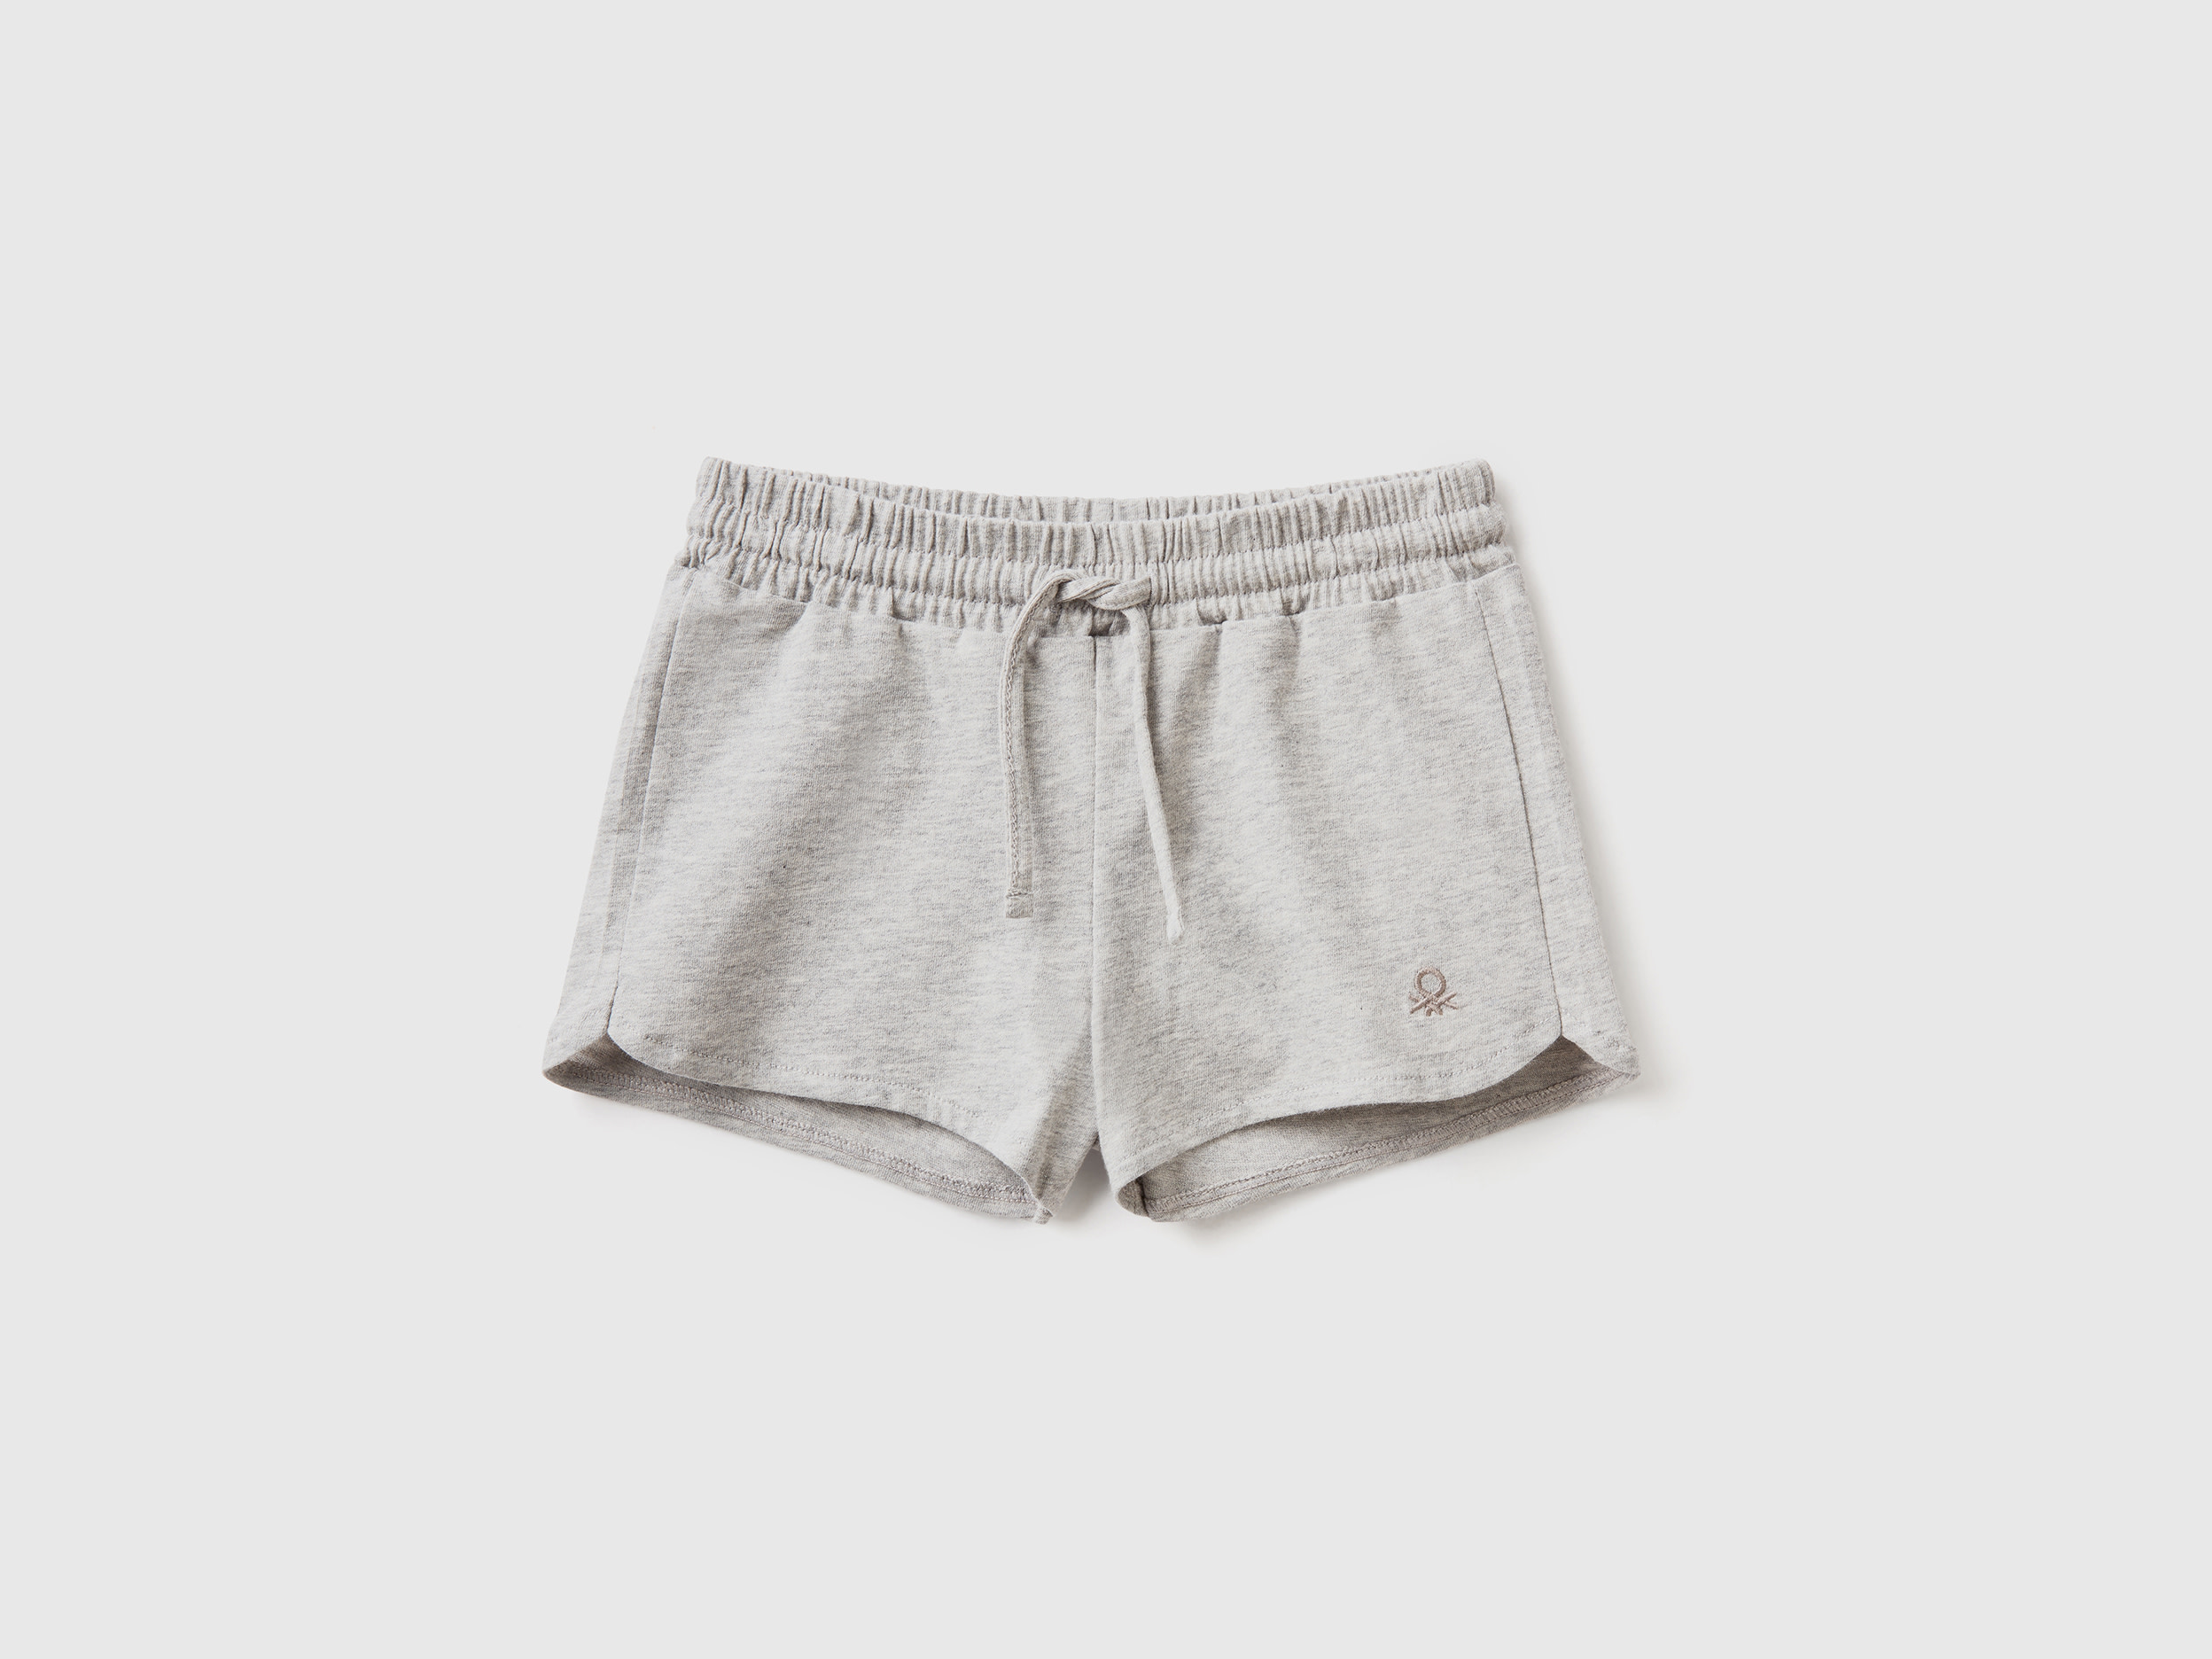 Benetton, Shorts With Drawstring In Organic Cotton, size 2-3, Light Gray, Kids